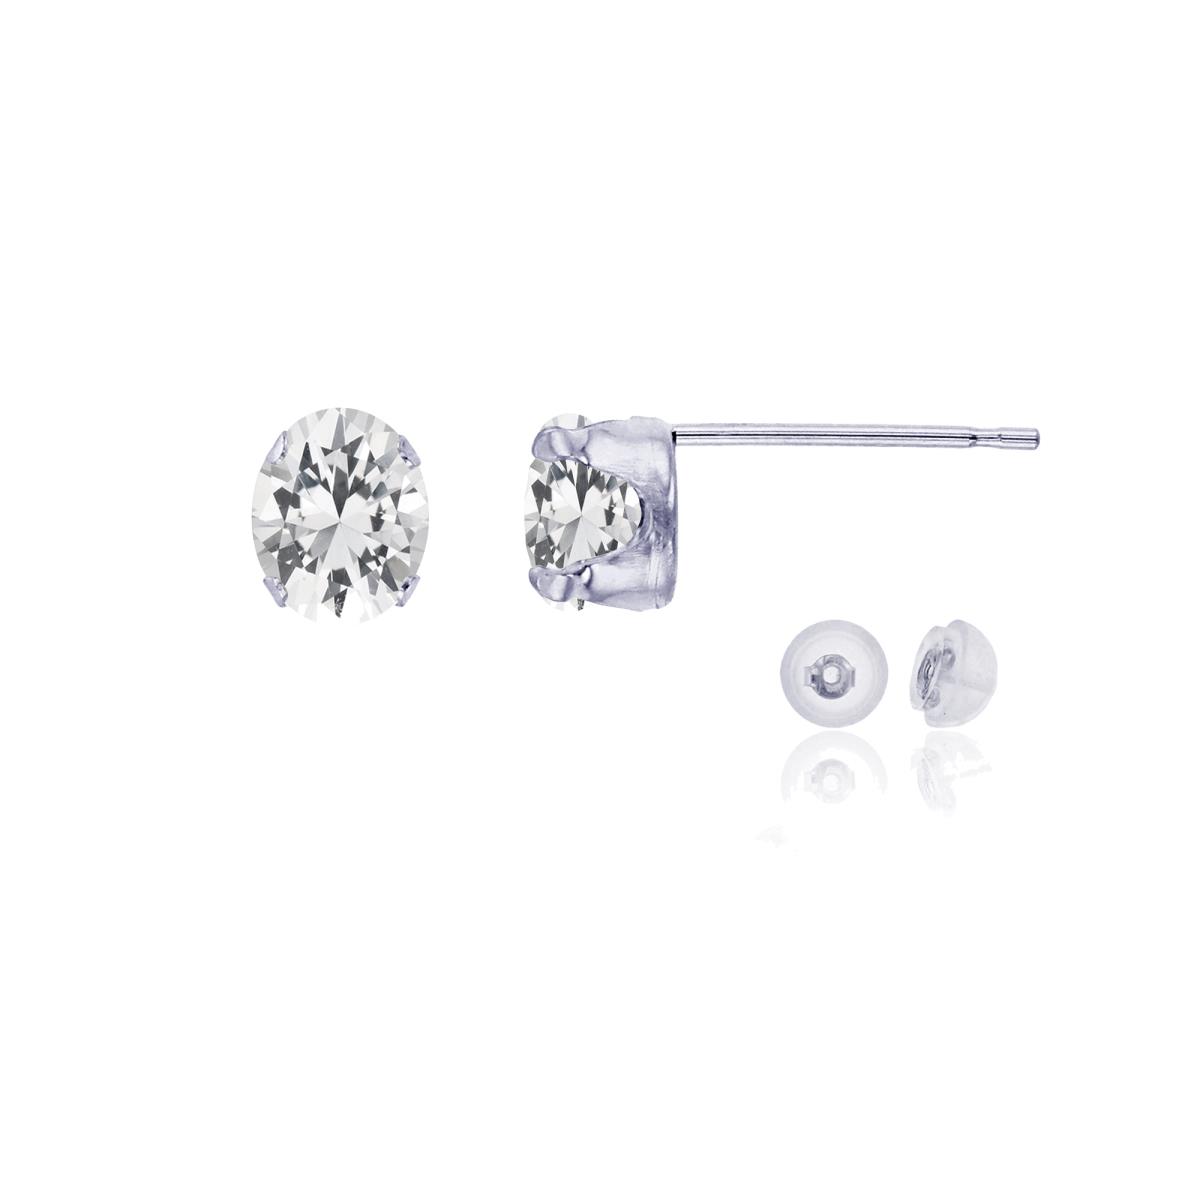 10K White Gold 6x4mm Oval Cr White Sapphire Stud Earring with Silicone Back